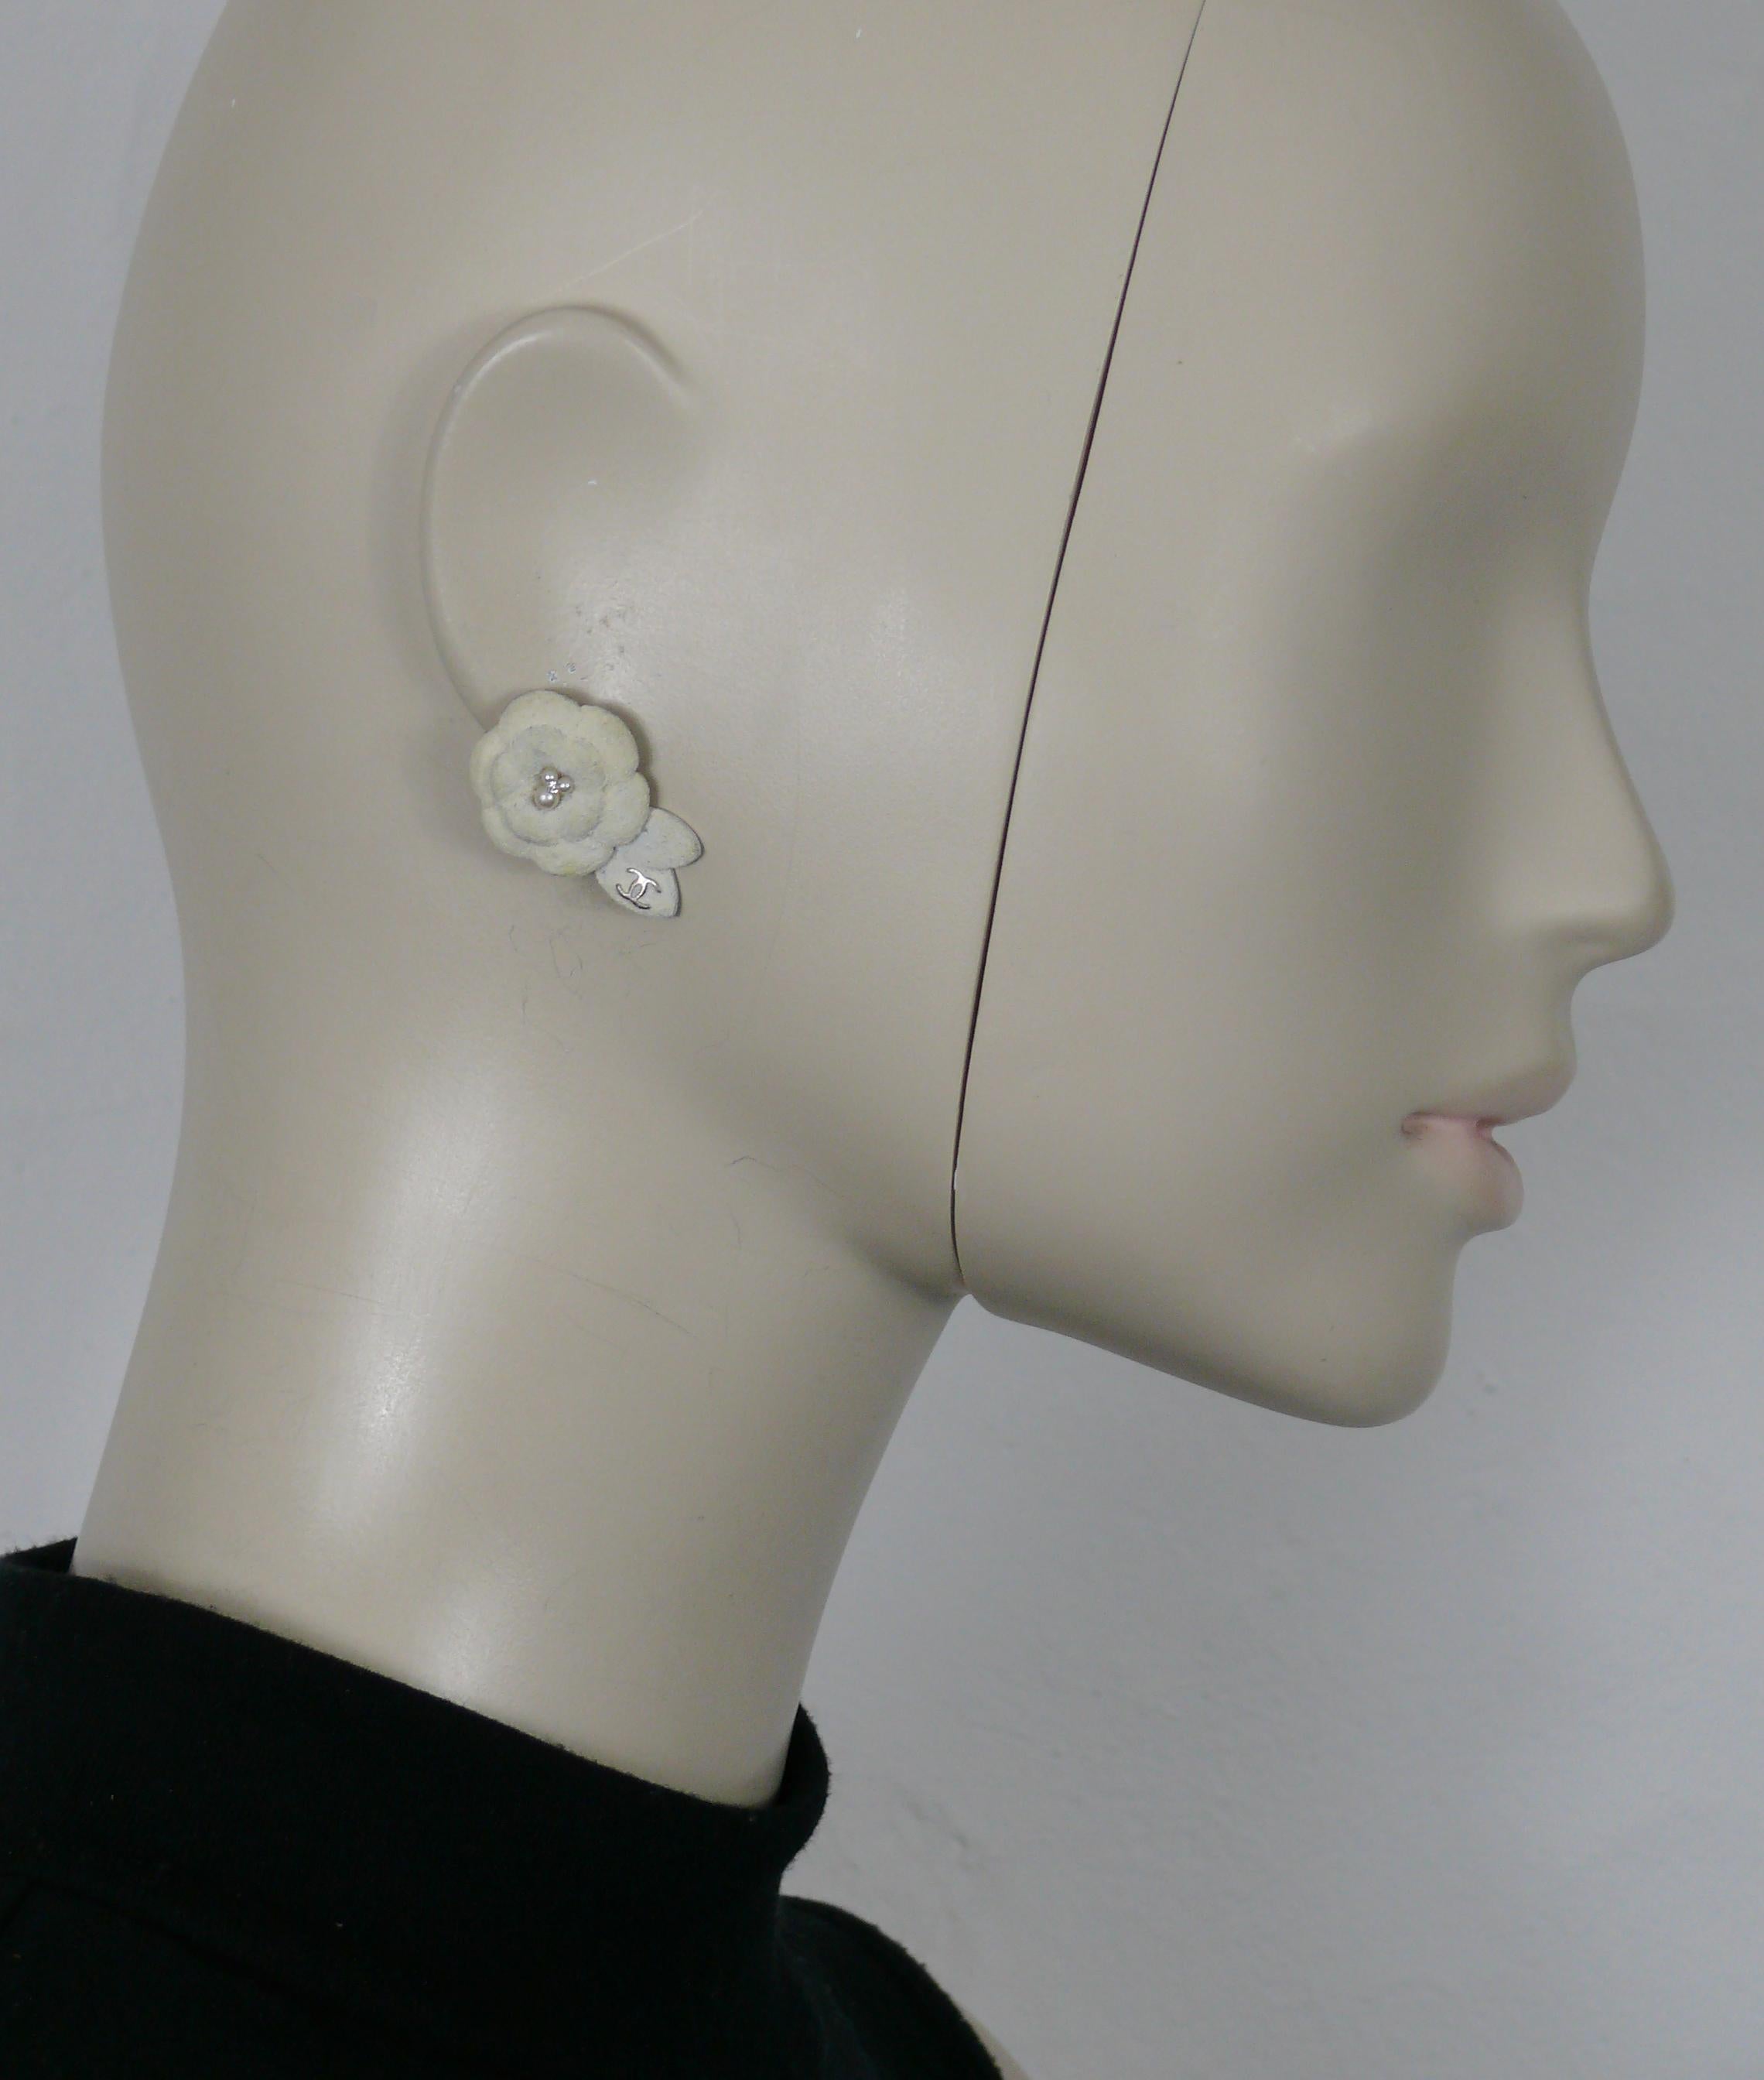 CHANEL by KARL LAGERFELD stud earrings featuring a textured off-white camellia flower with faux pearls and clear crystals at the center, CC logo on the leaves.

From the Fall 2005 Collection.

Embossed CHANEL 05 A Made in France.

Indicative